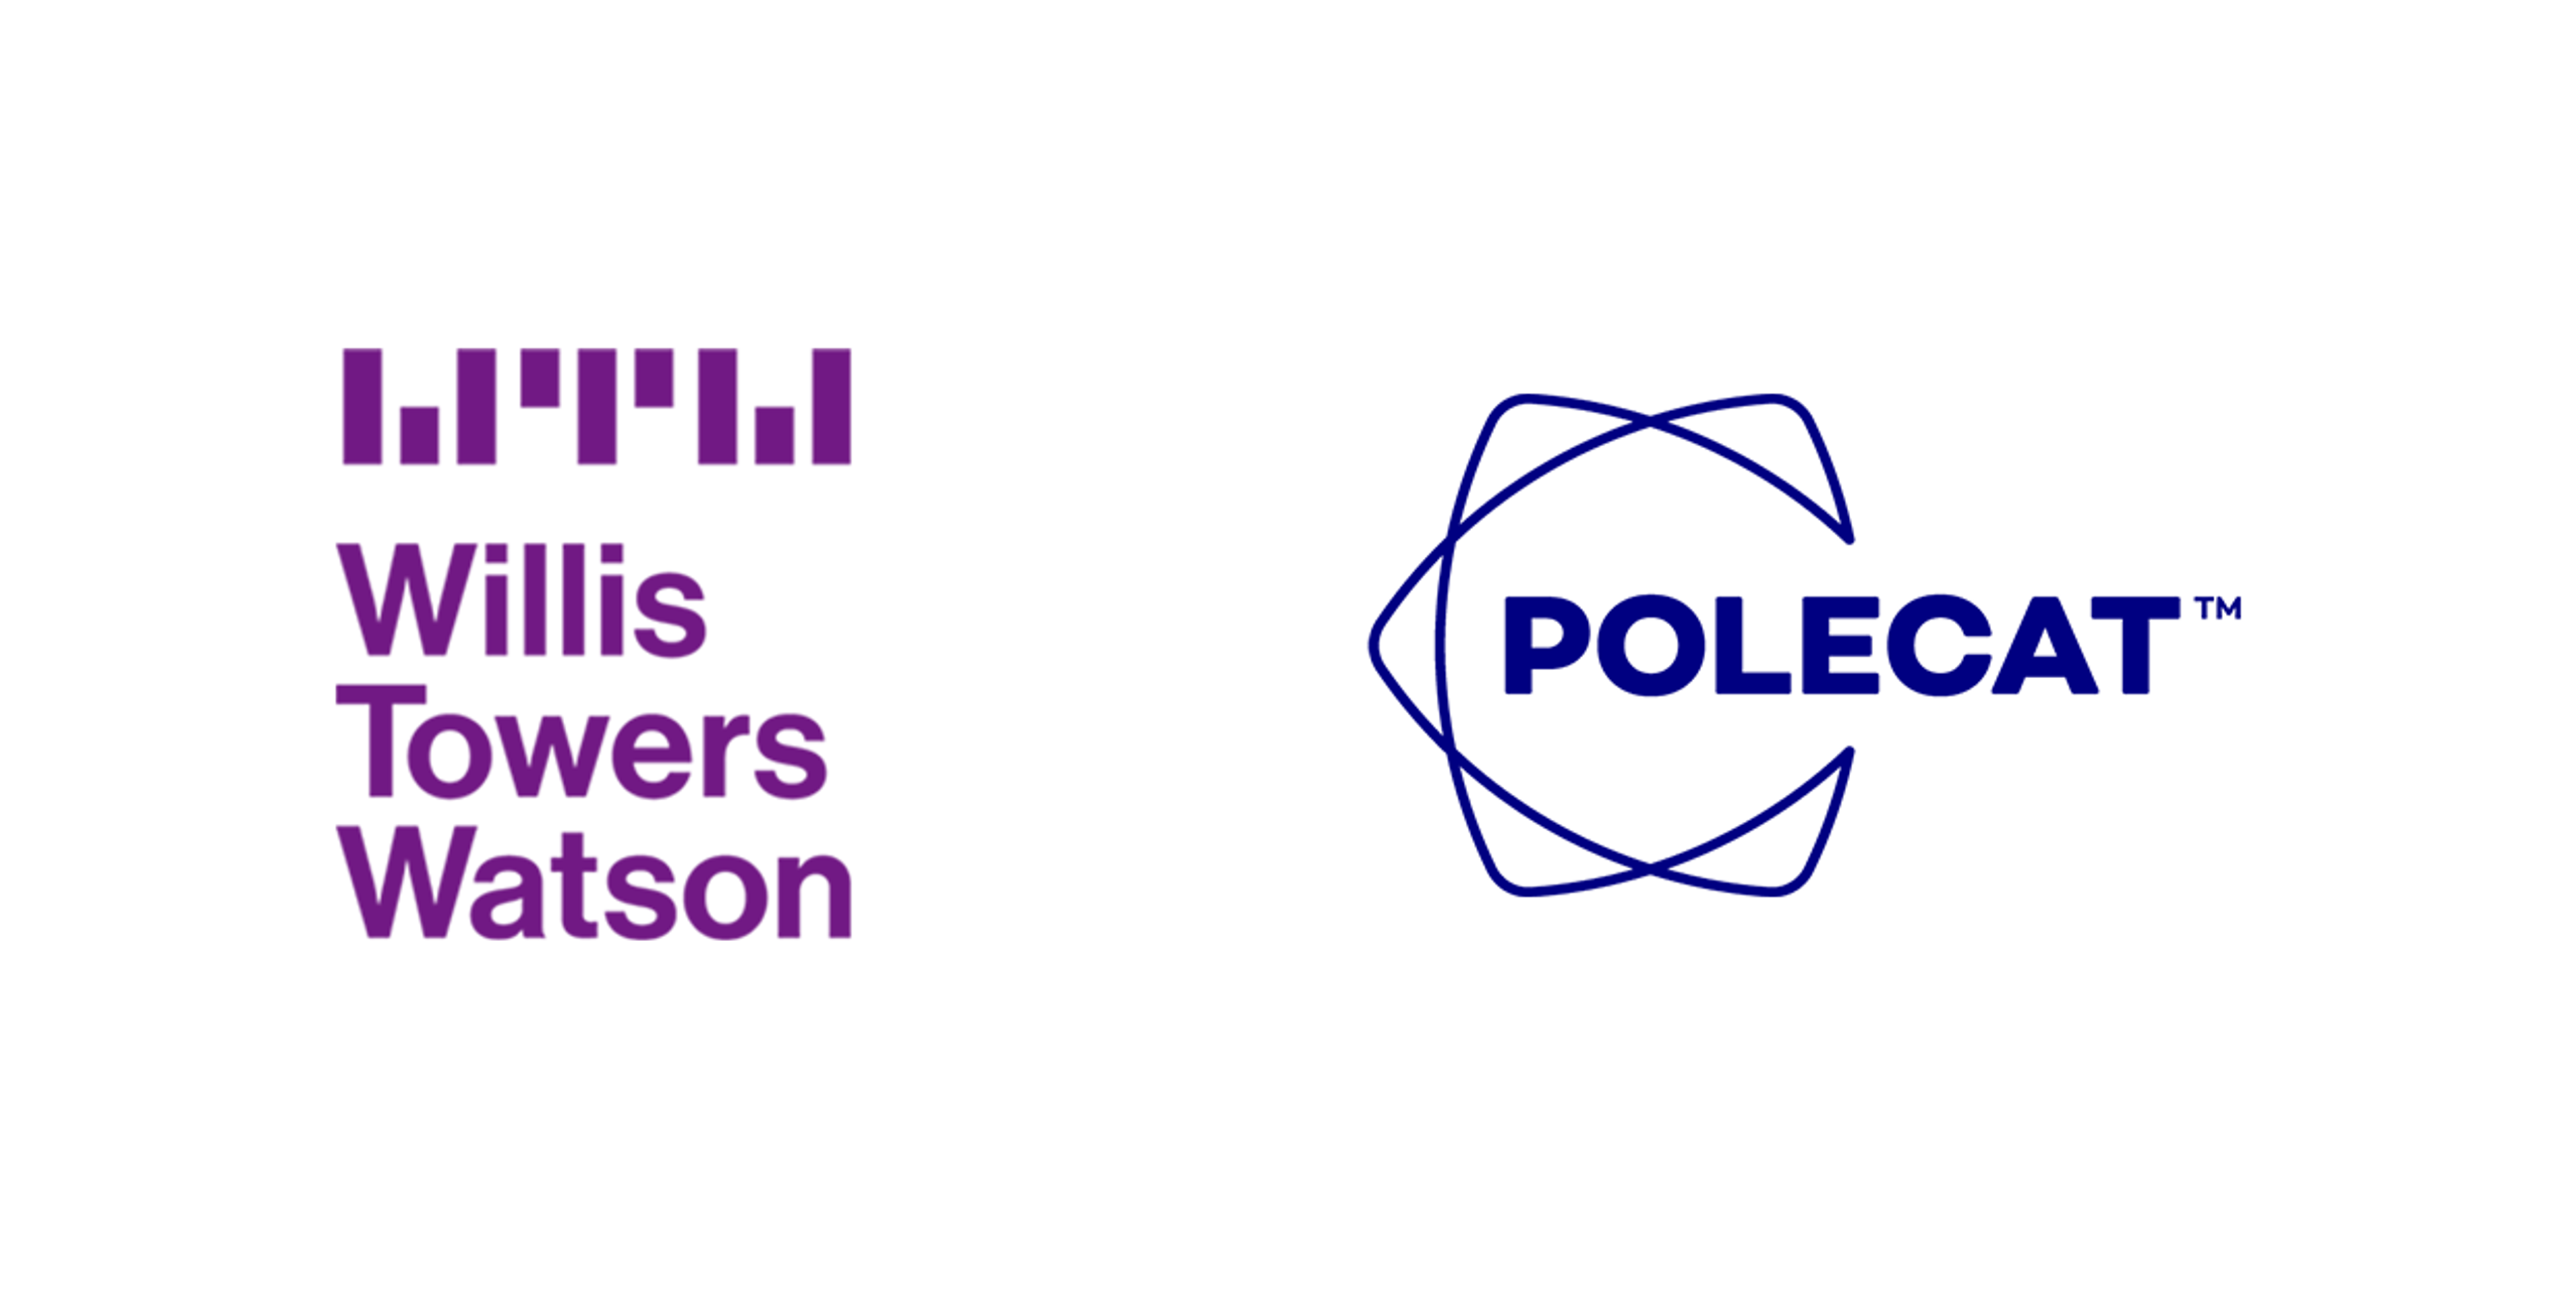 The Willis Towers Watson logo and the Polecat Logo